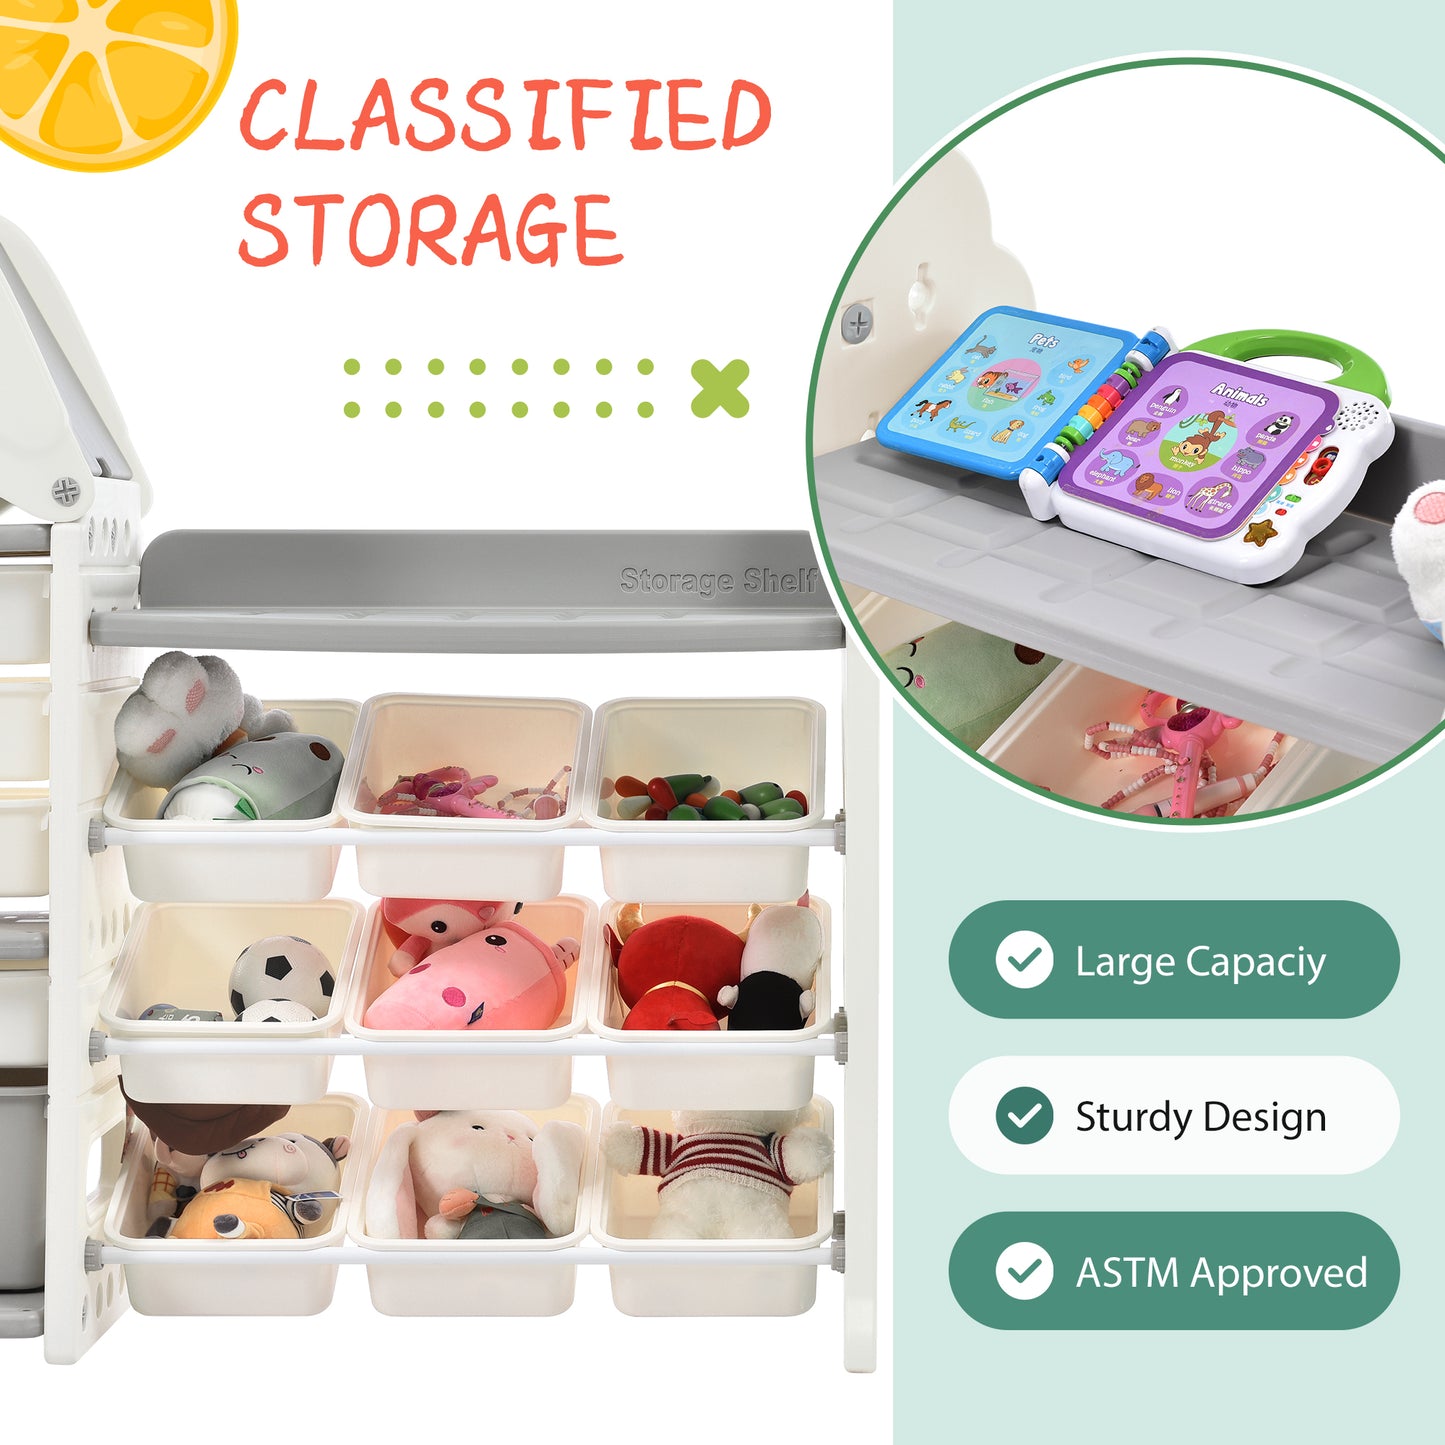 Kids Toy Storage Organizer with 14 Bins, Multi-functional Nursery Organizer Kids Furniture Set Toy Storage Cabinet Unit with HDPE Shelf and Bins for Playroom, Bedroom, Living Room